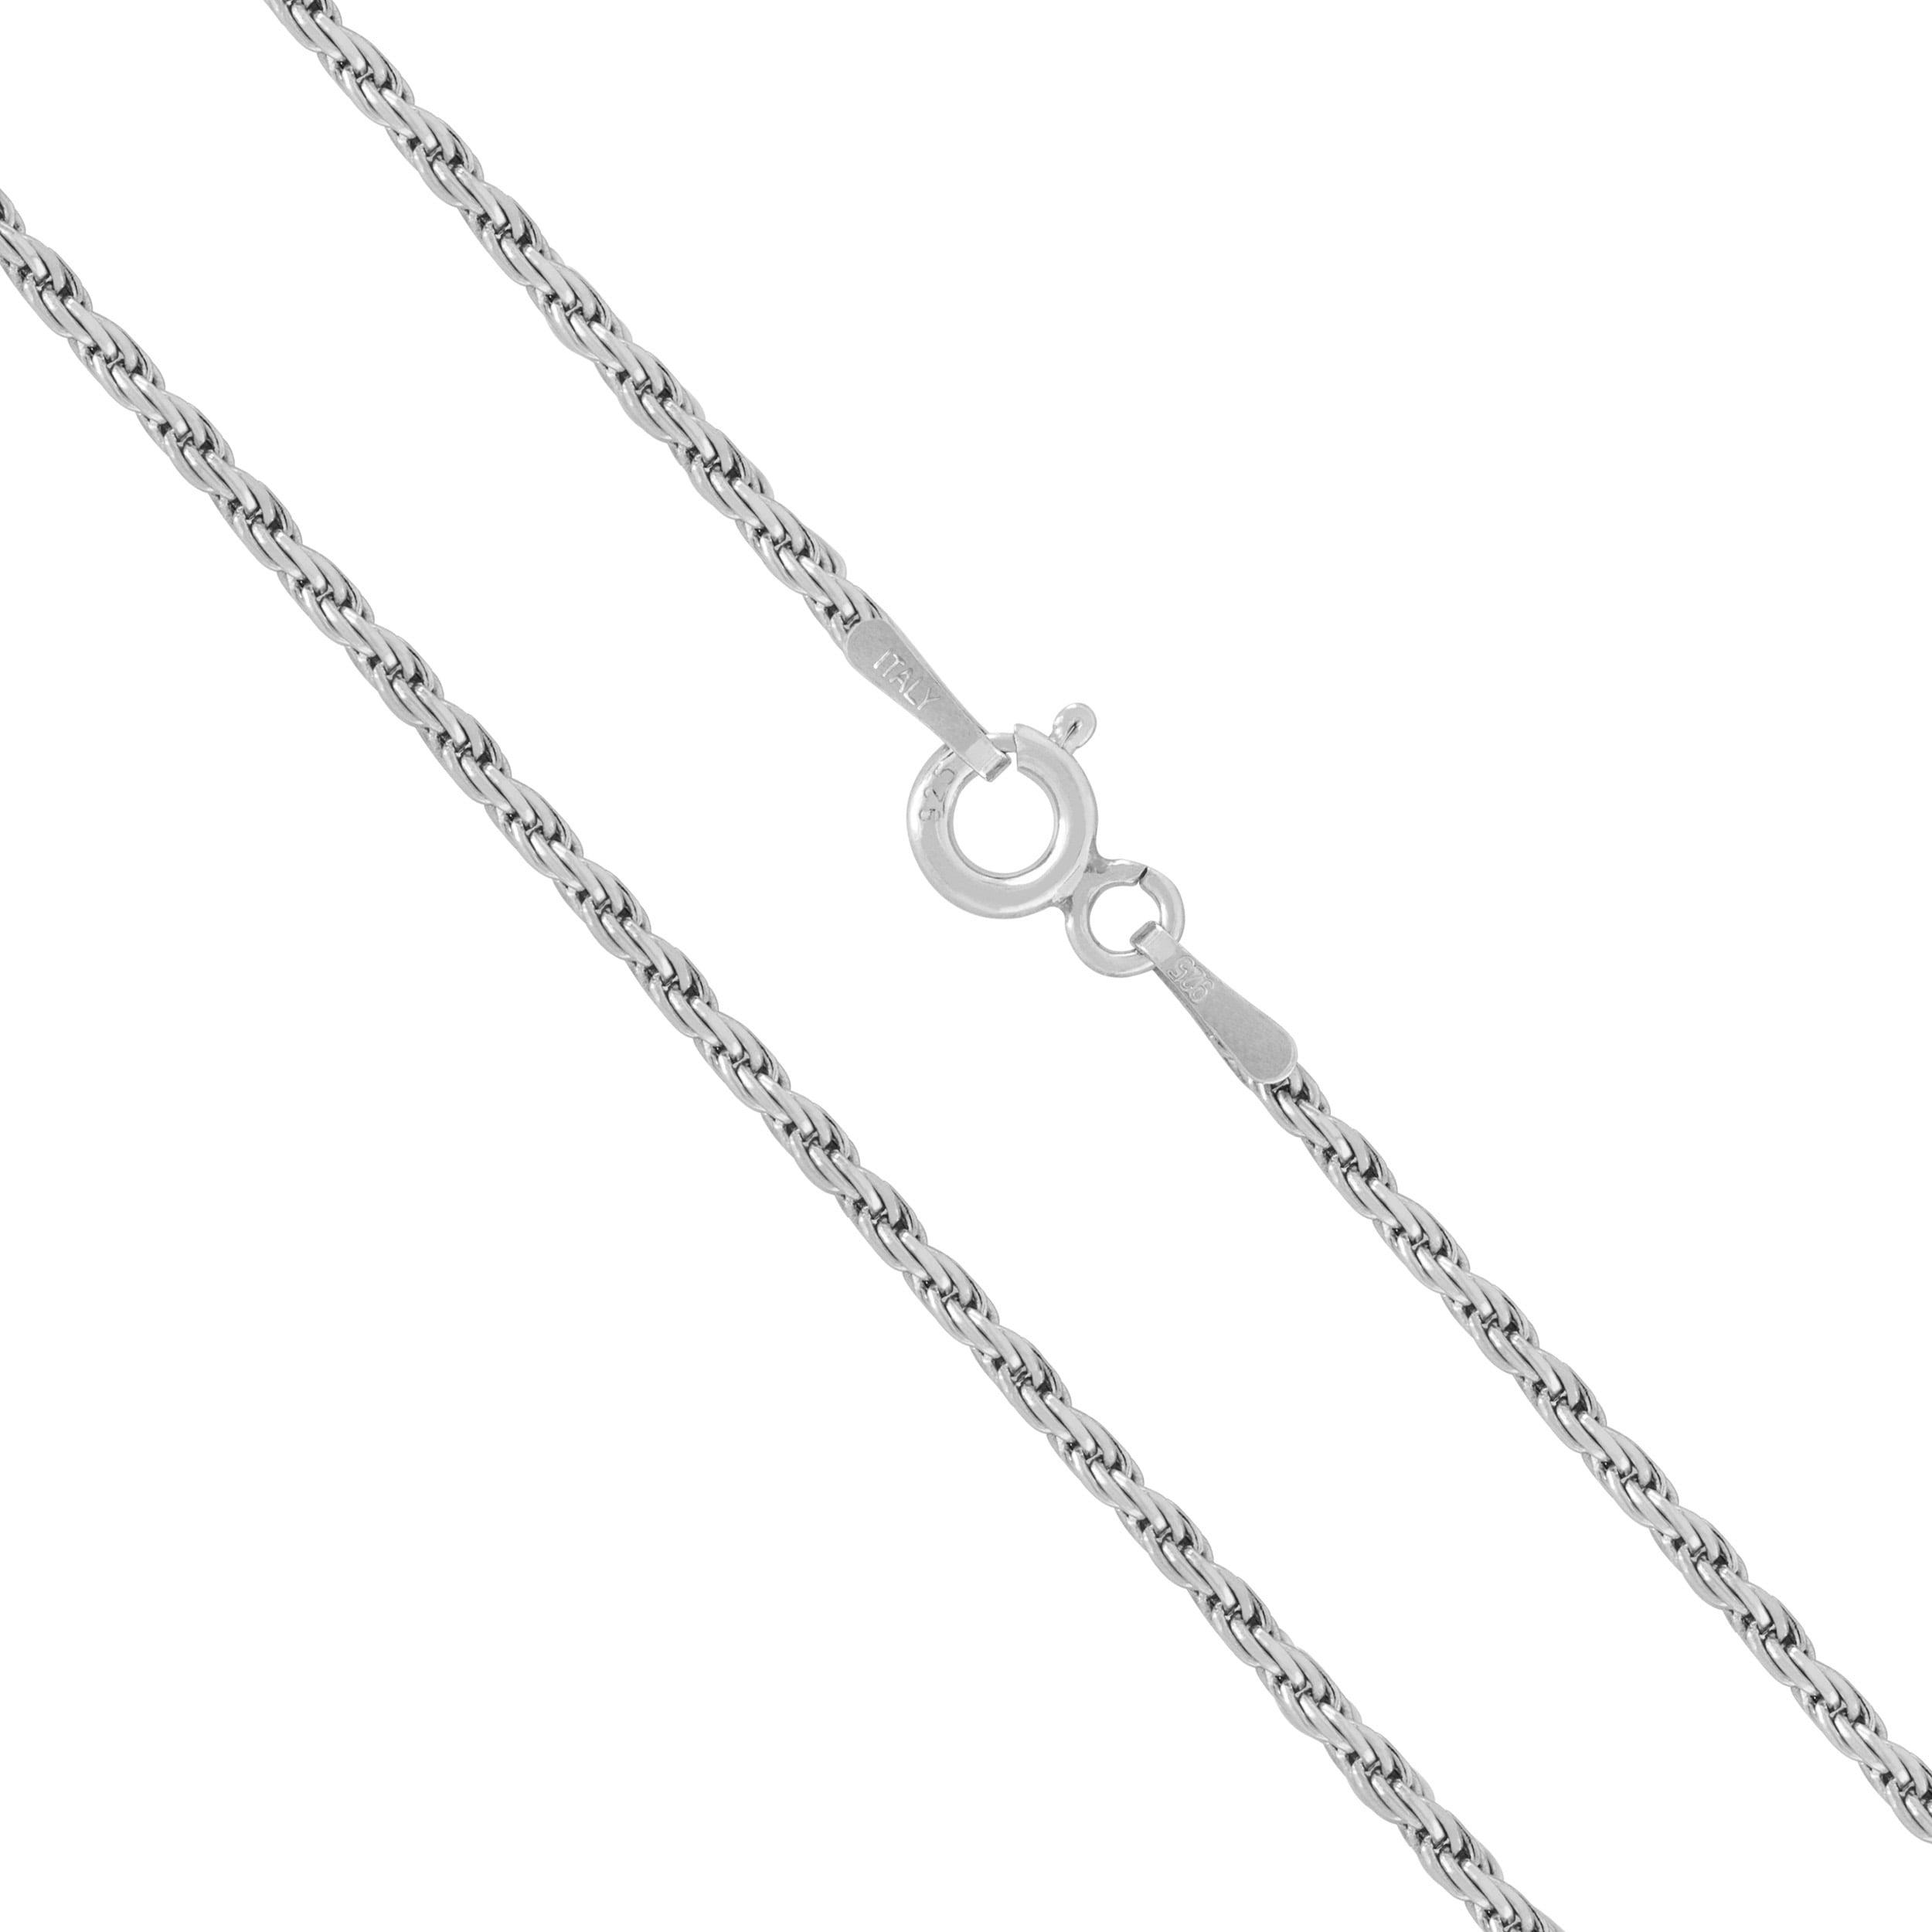 Honolulu Jewelry Company Sterling Silver 2mm Cable Chain 14-36 